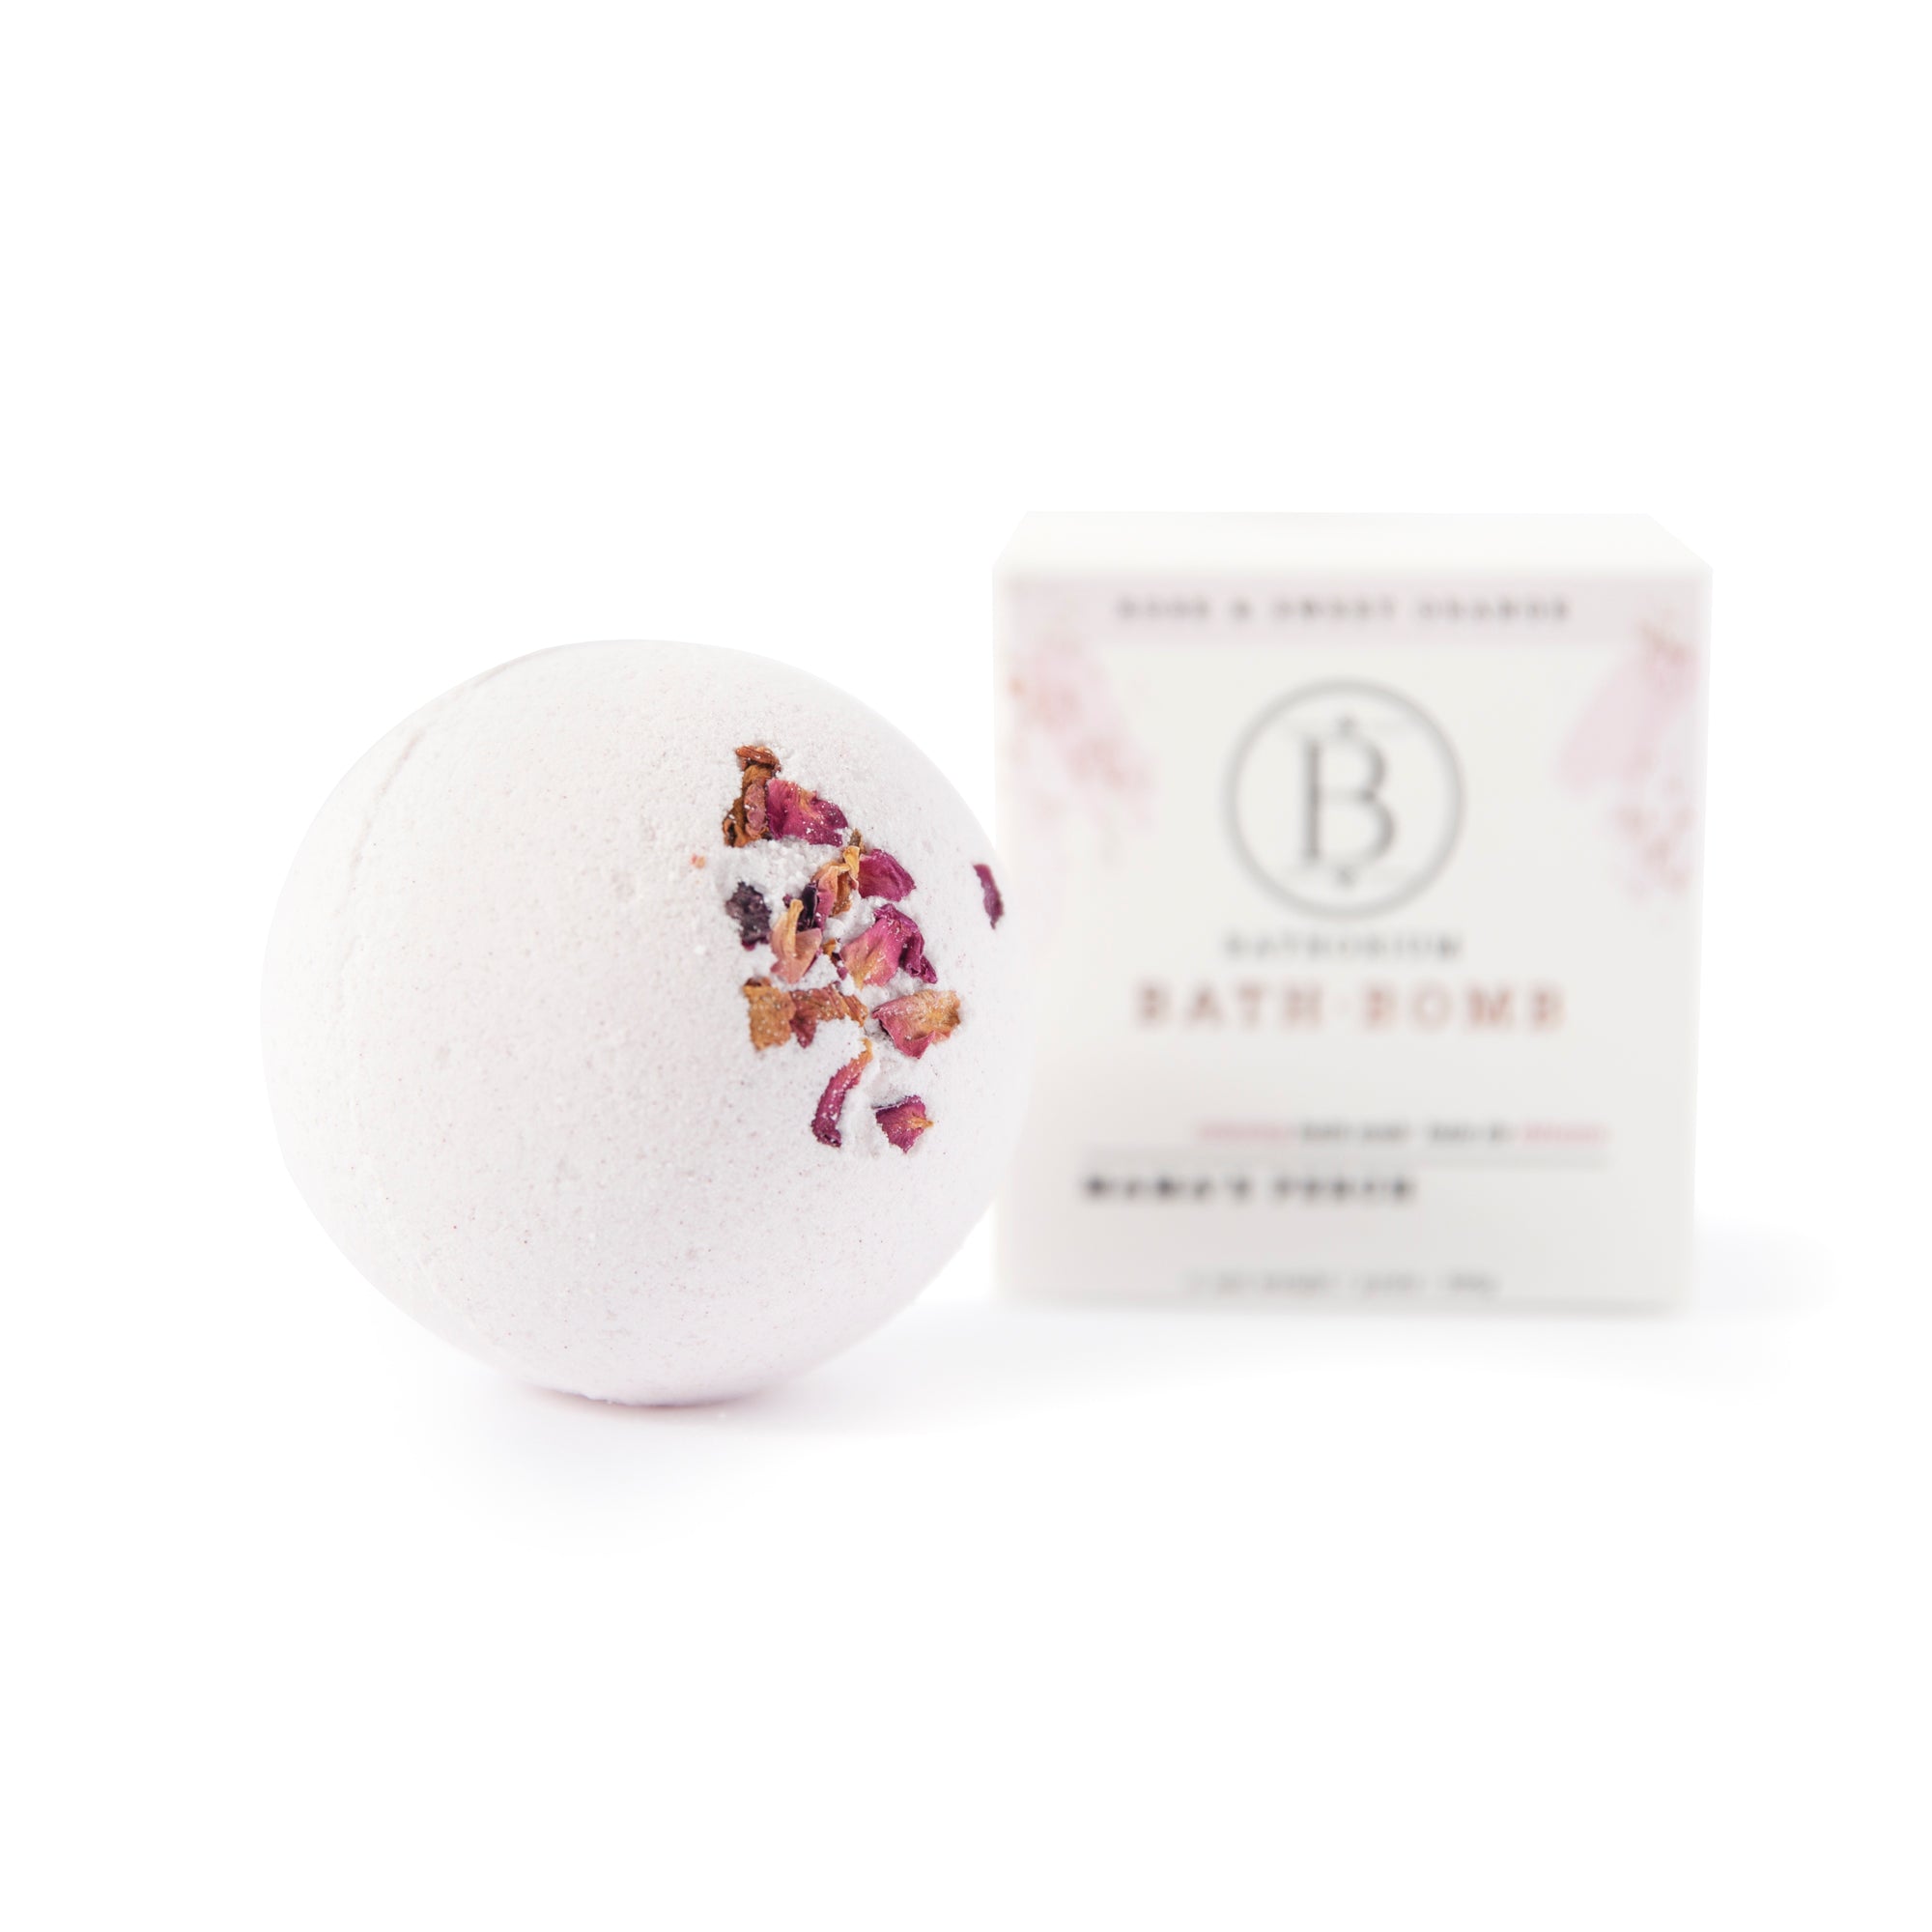 RELAXING FLORAL BATH BOMB - MAMA'S PERCH